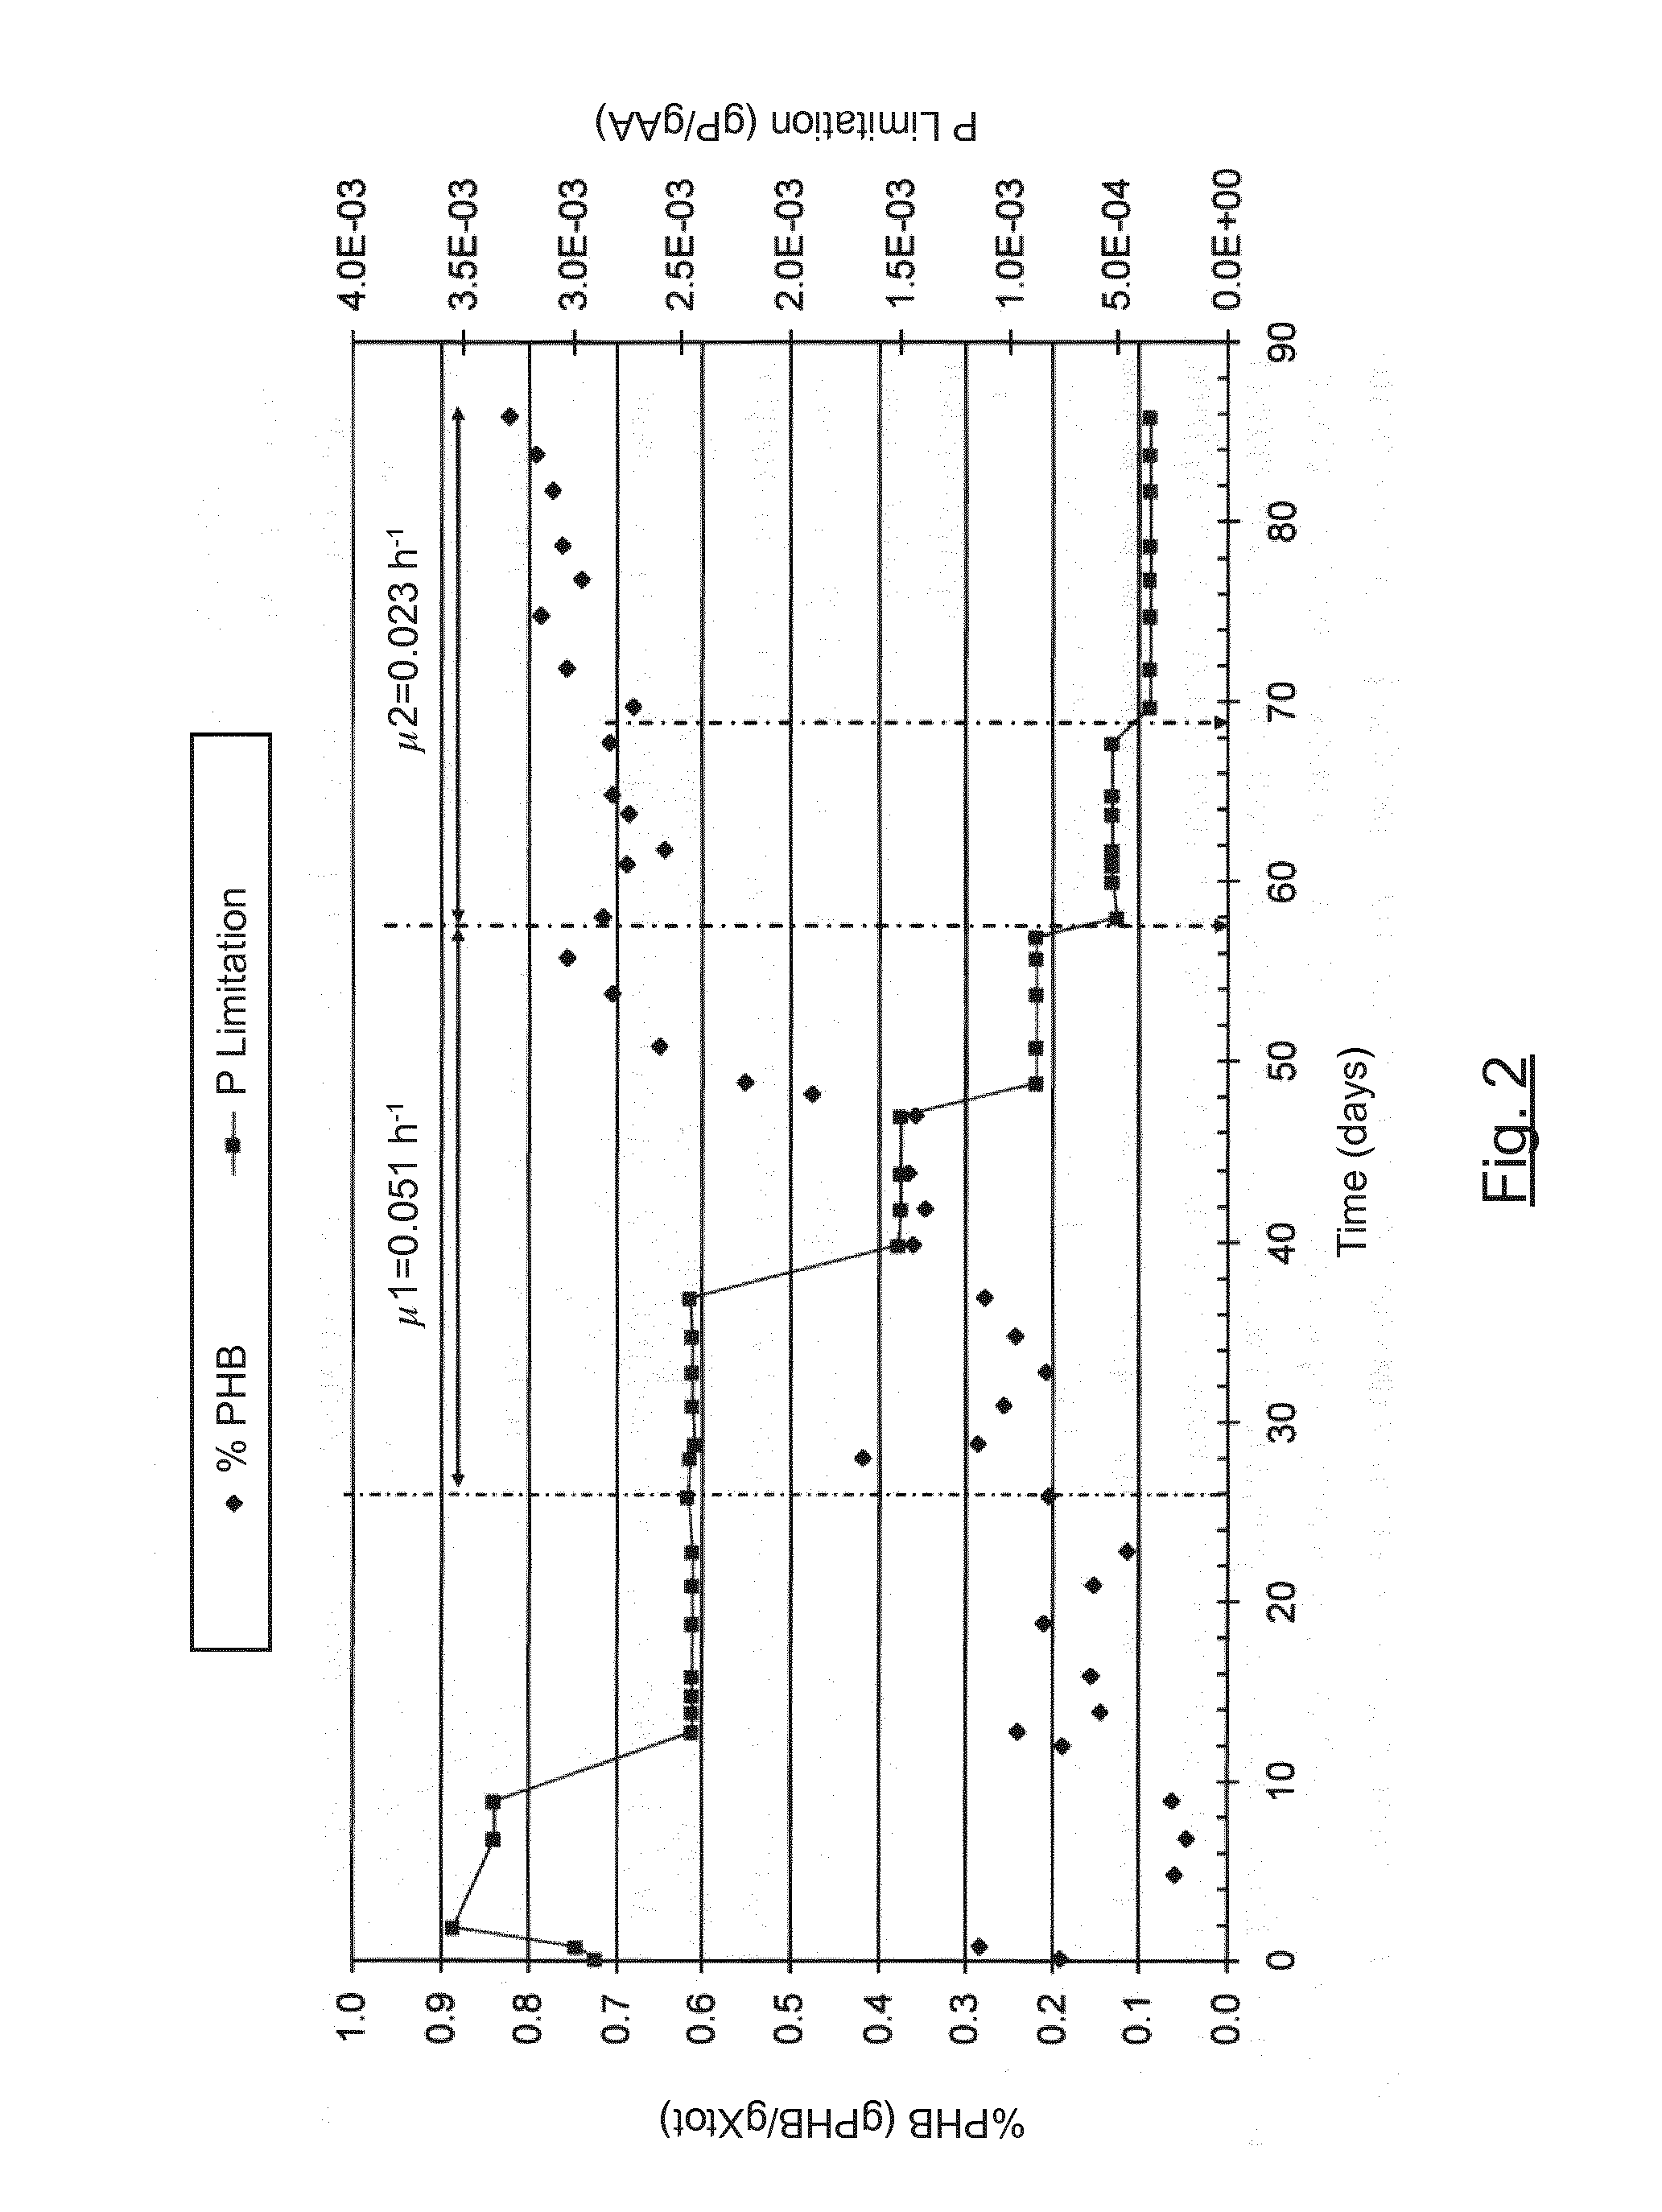 Method for producing polyhydroxyalkanoates by microorganisms